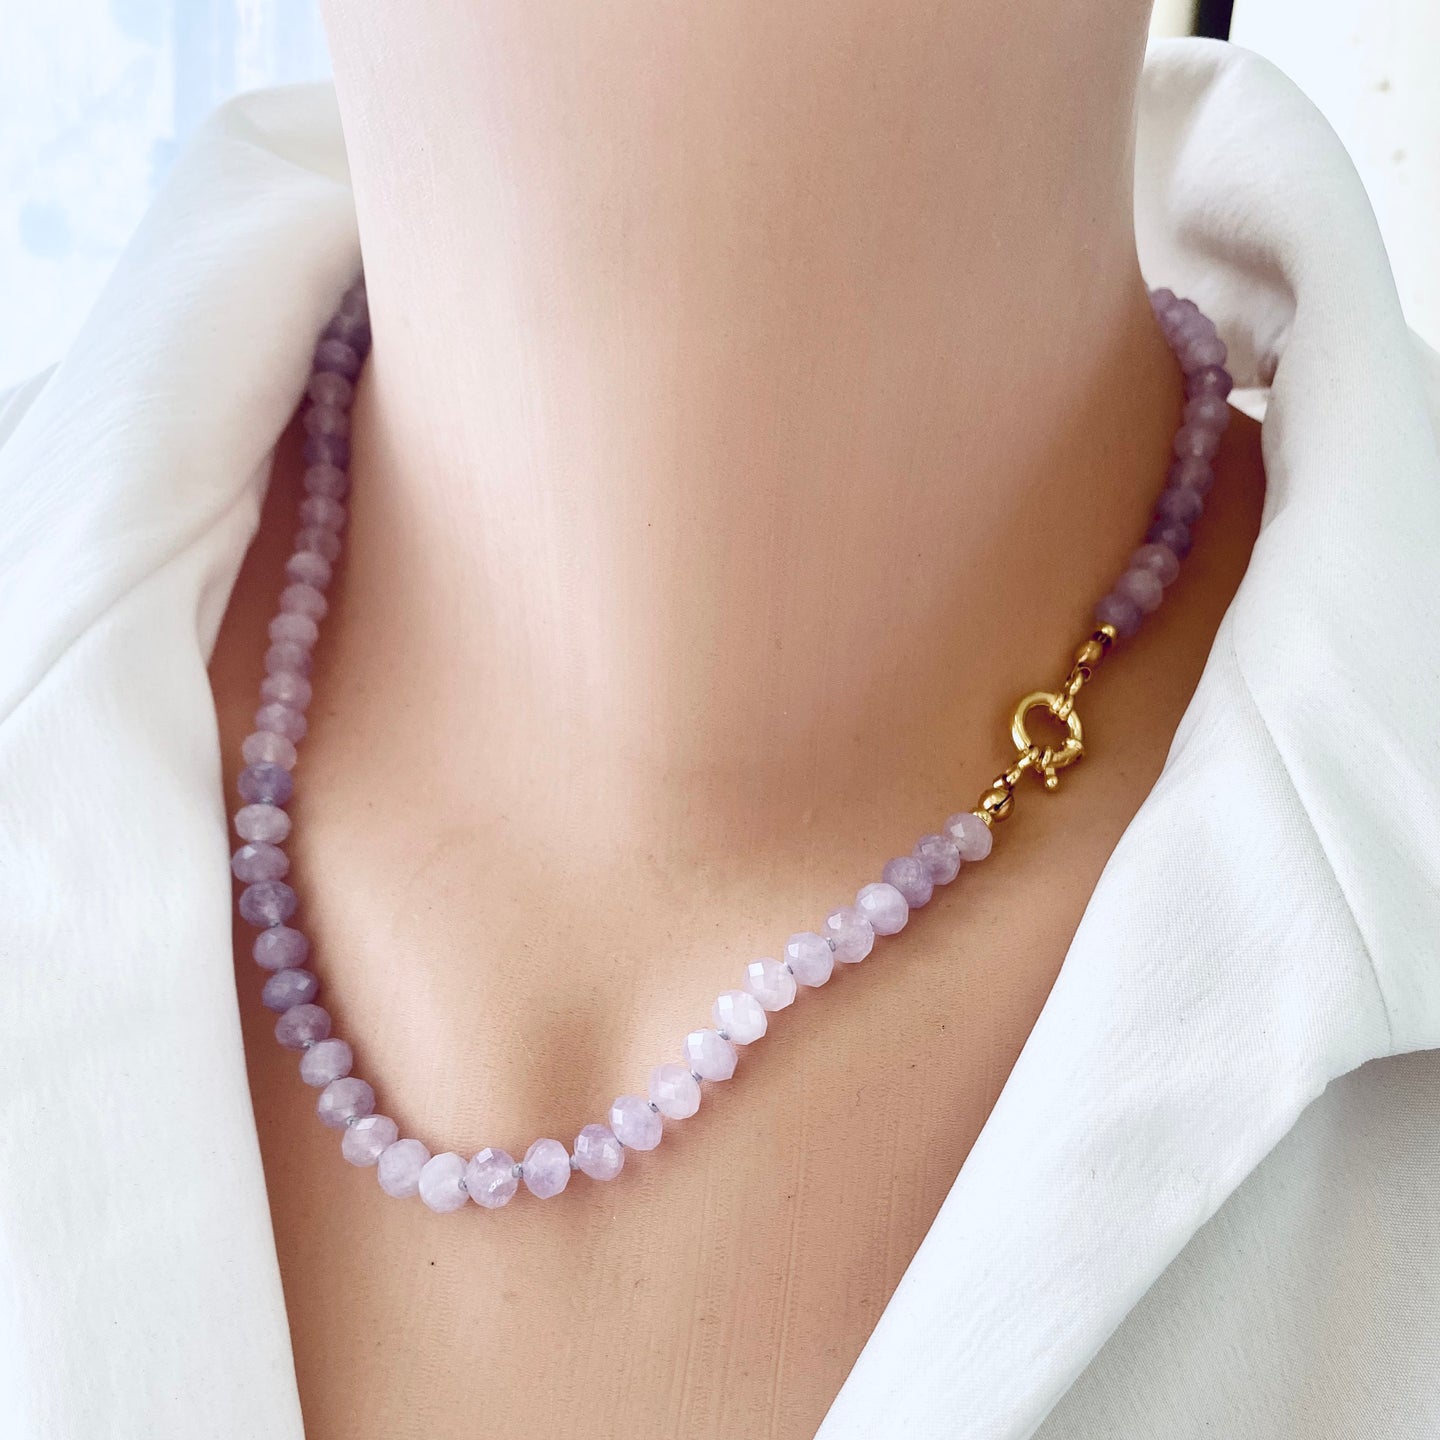 Lavender Amethyst Candy Necklace, Baroque Pearl Pendant, Gold Vermeil, February birthstone, 18.5